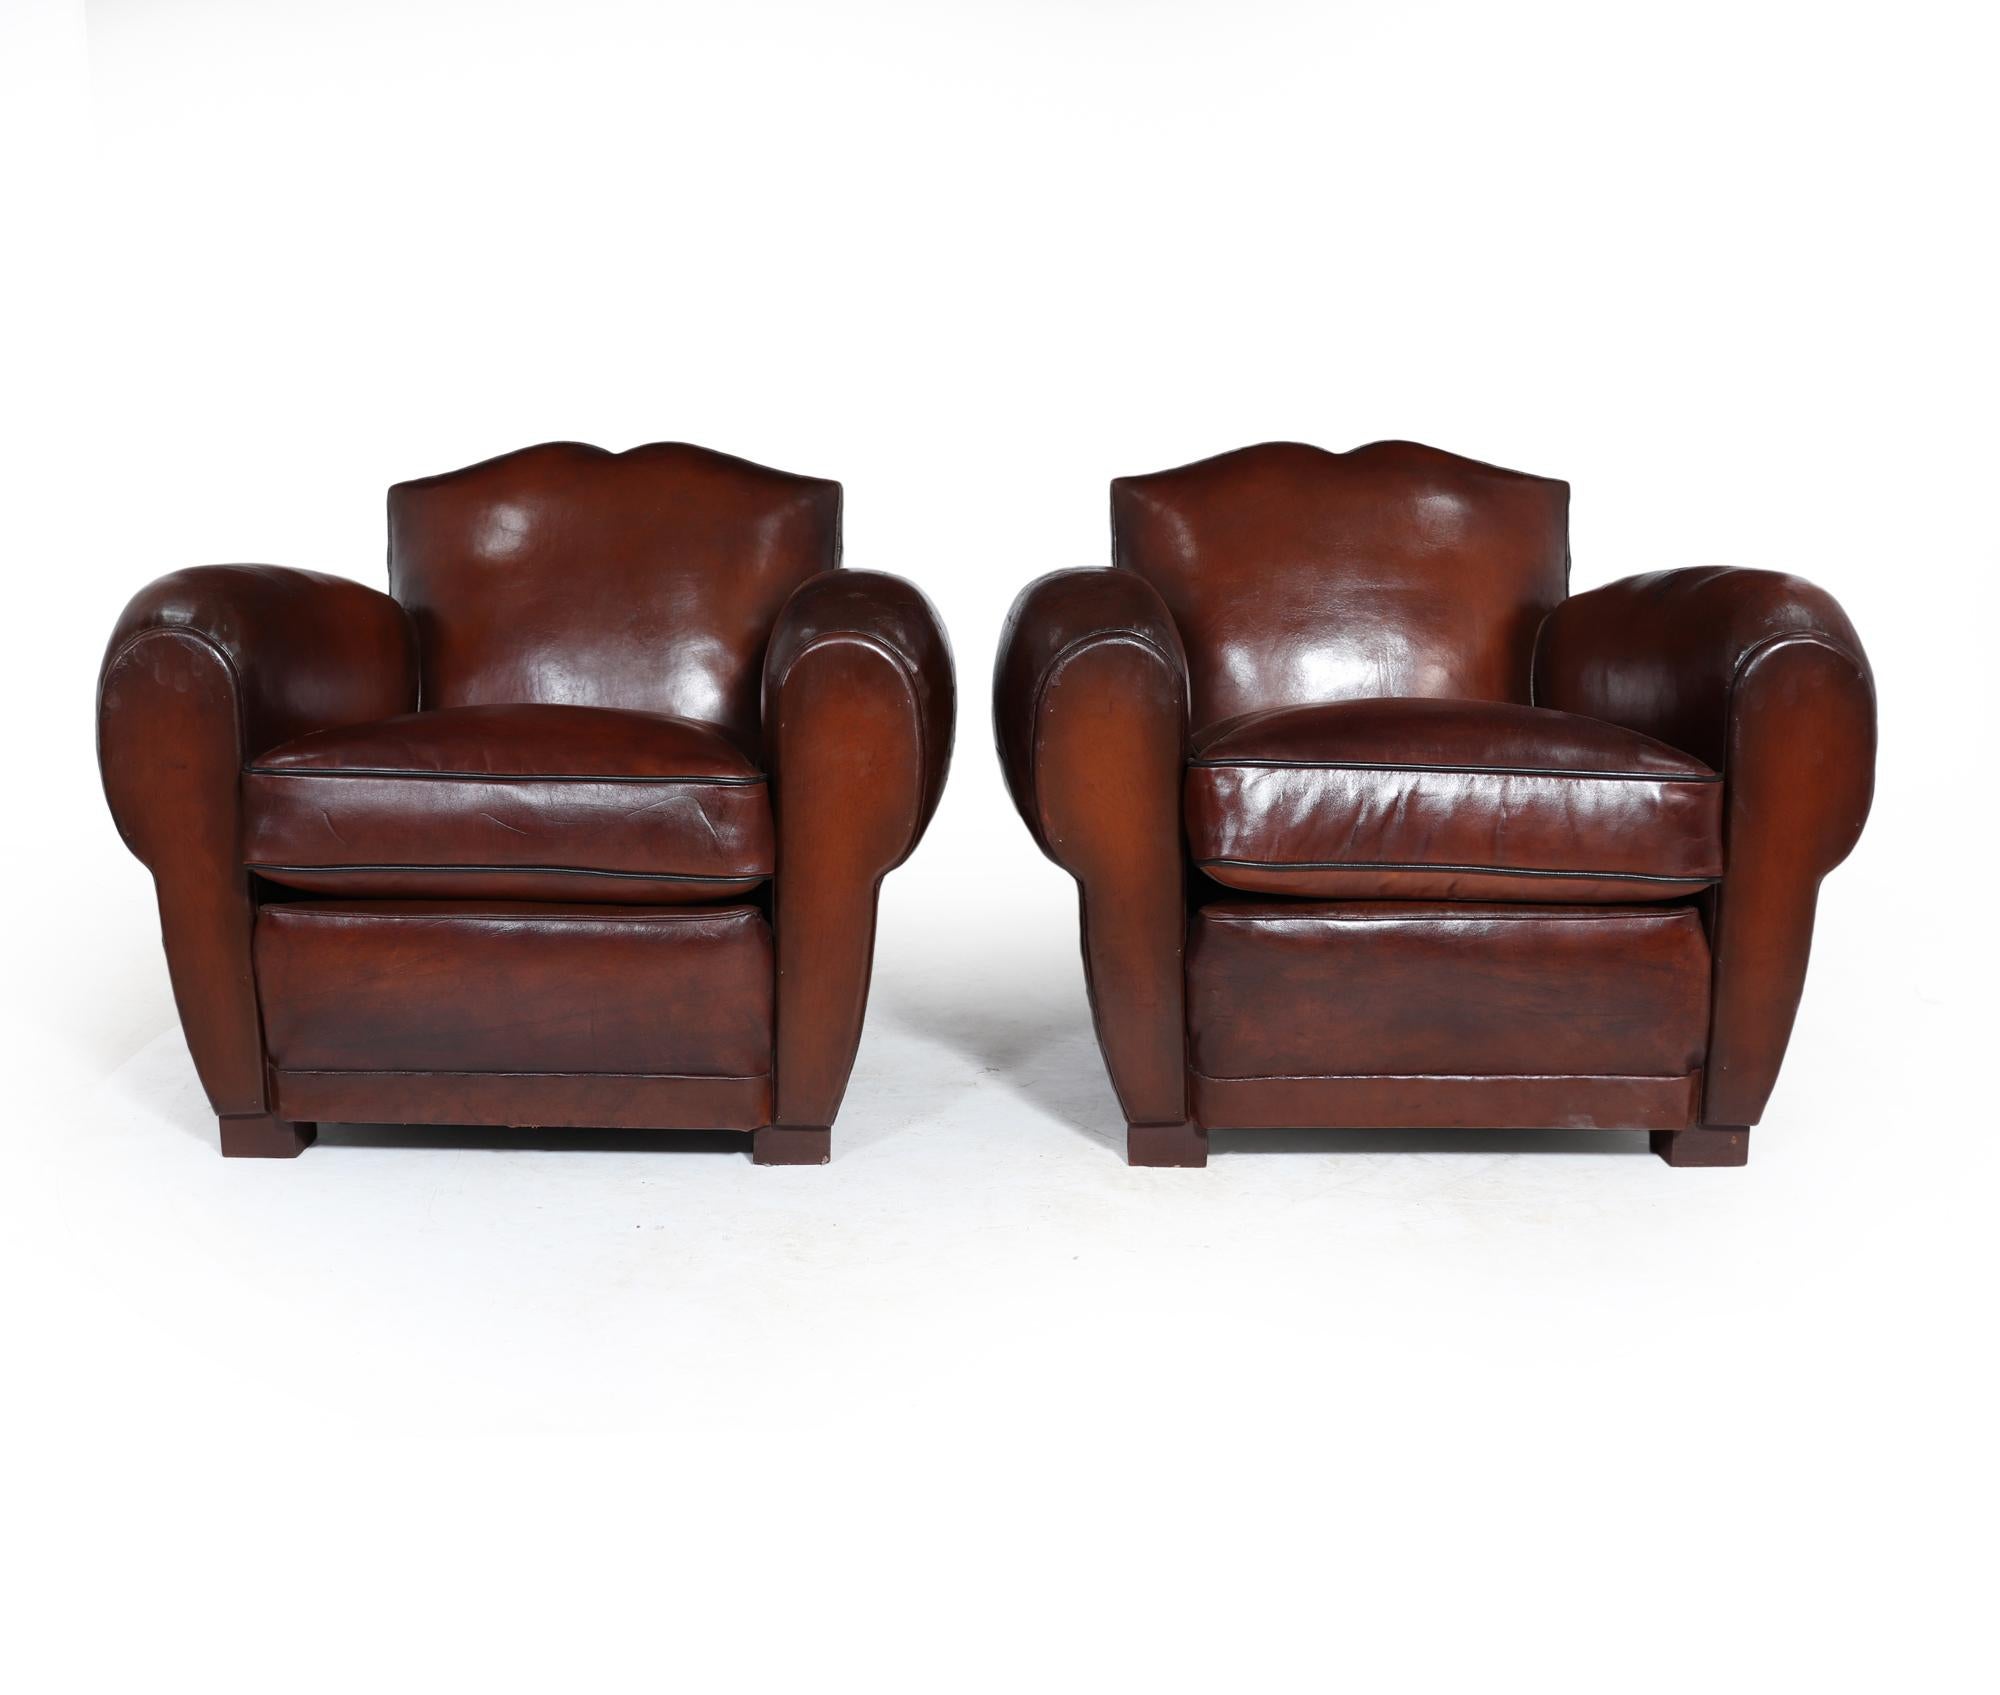 A pair of French leather moustache back club chairs are the perfect addition to any home. The chairs boast high-grade leather upholstery that has undergone treatment and sealing, ensuring durability for the years ahead. Their sturdy frames and